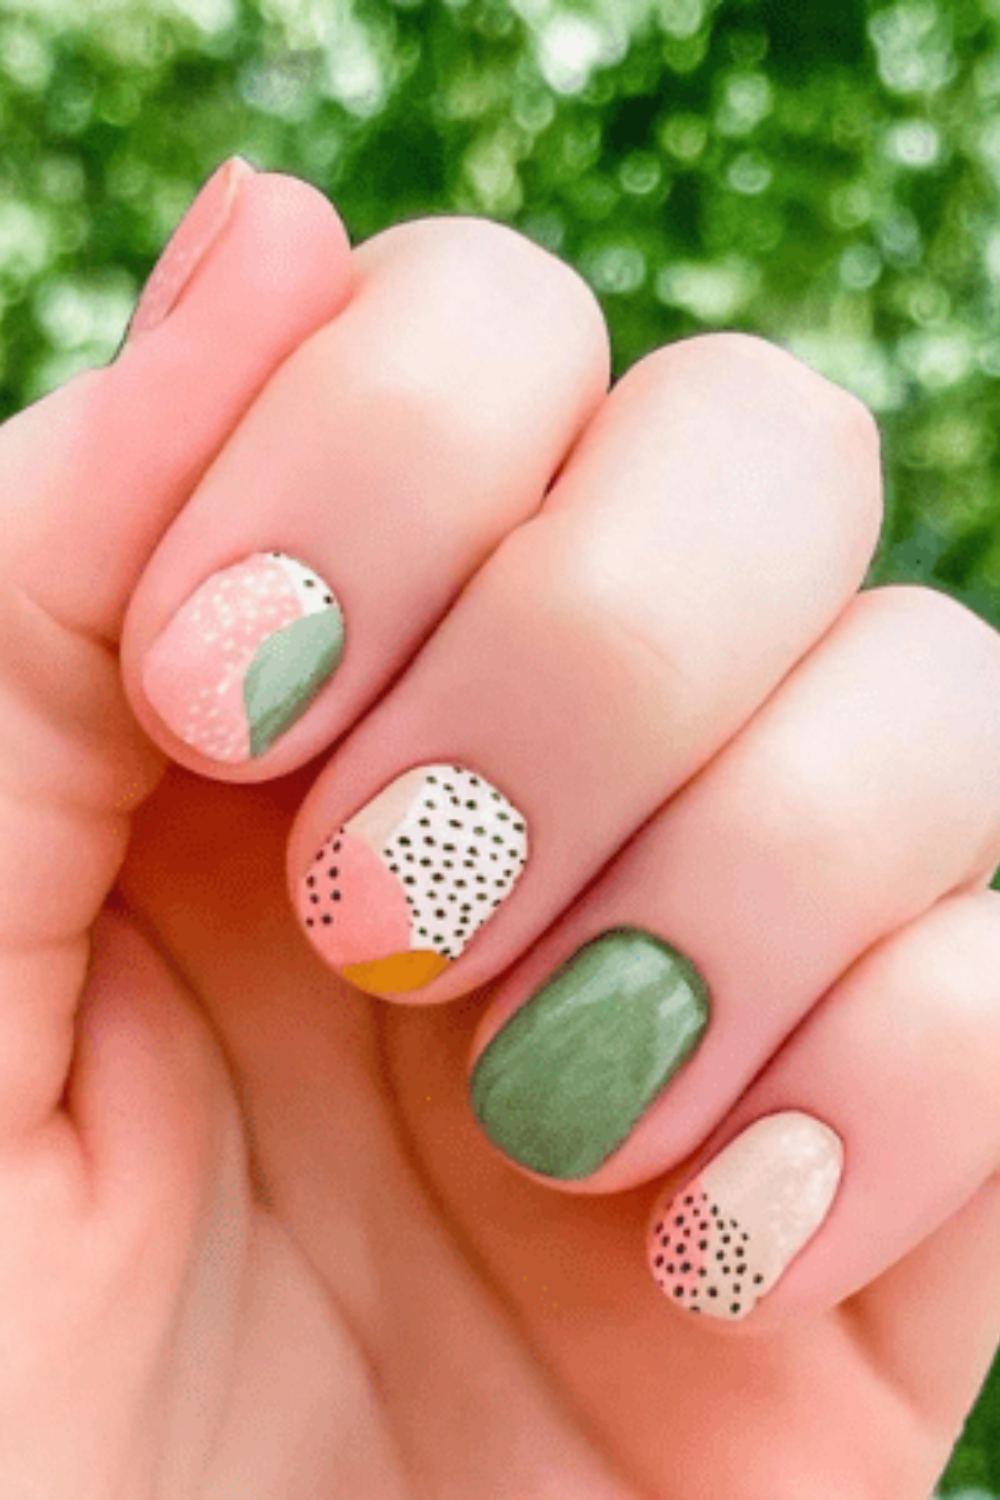 45 Short Nail Designs for the Girl Who Wants to Look Chic & Trendy